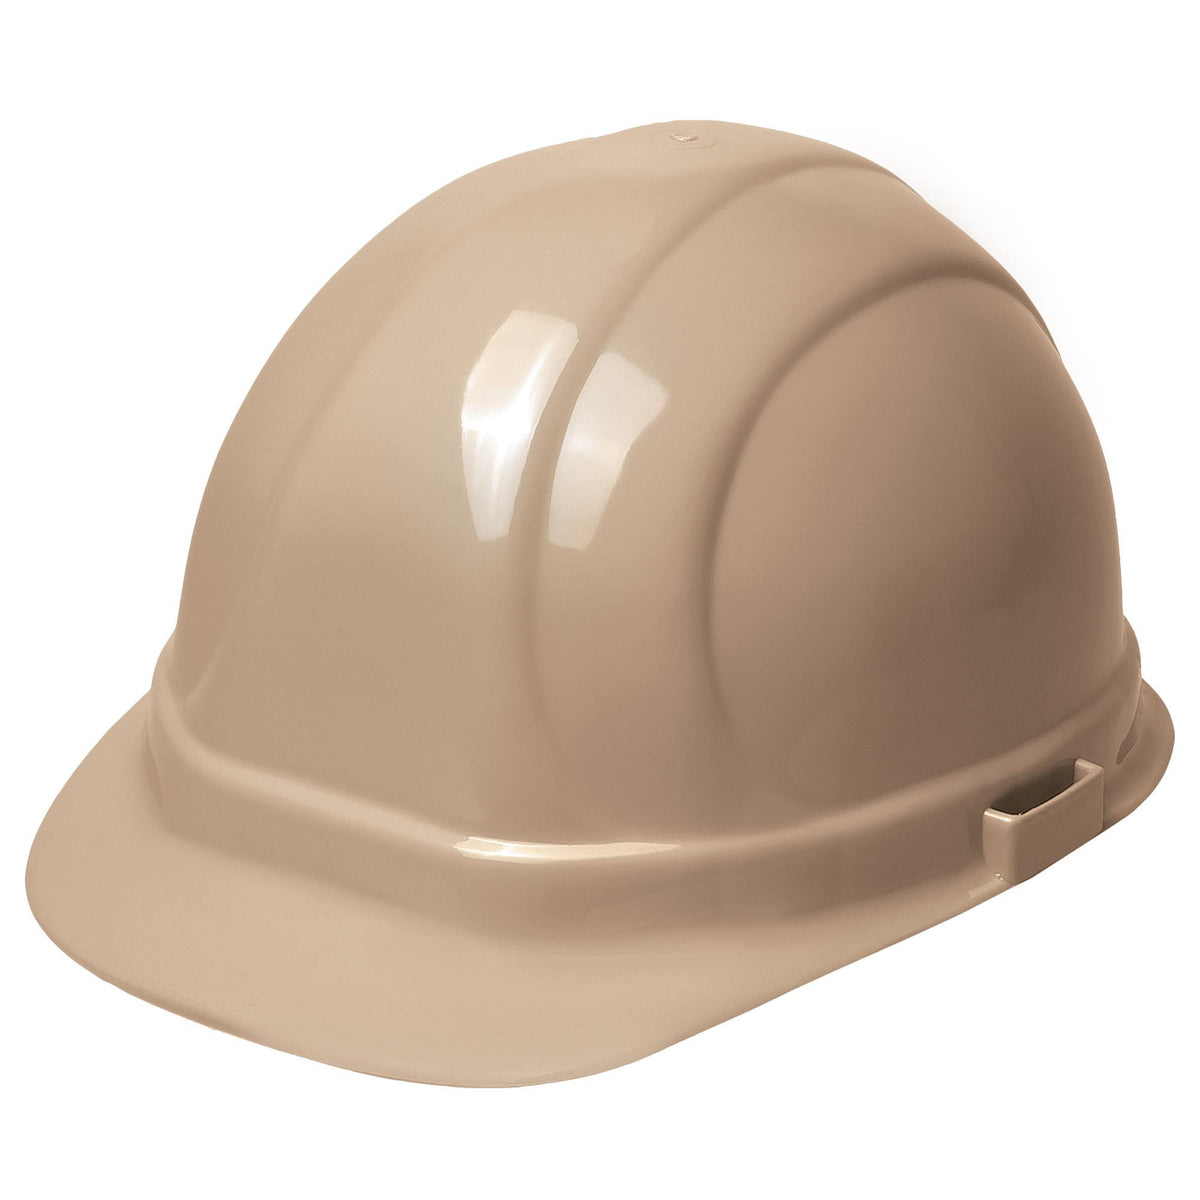 Omega II® Cap with Accessory Slots and 6-Point Slide-Lock Suspension 1pc